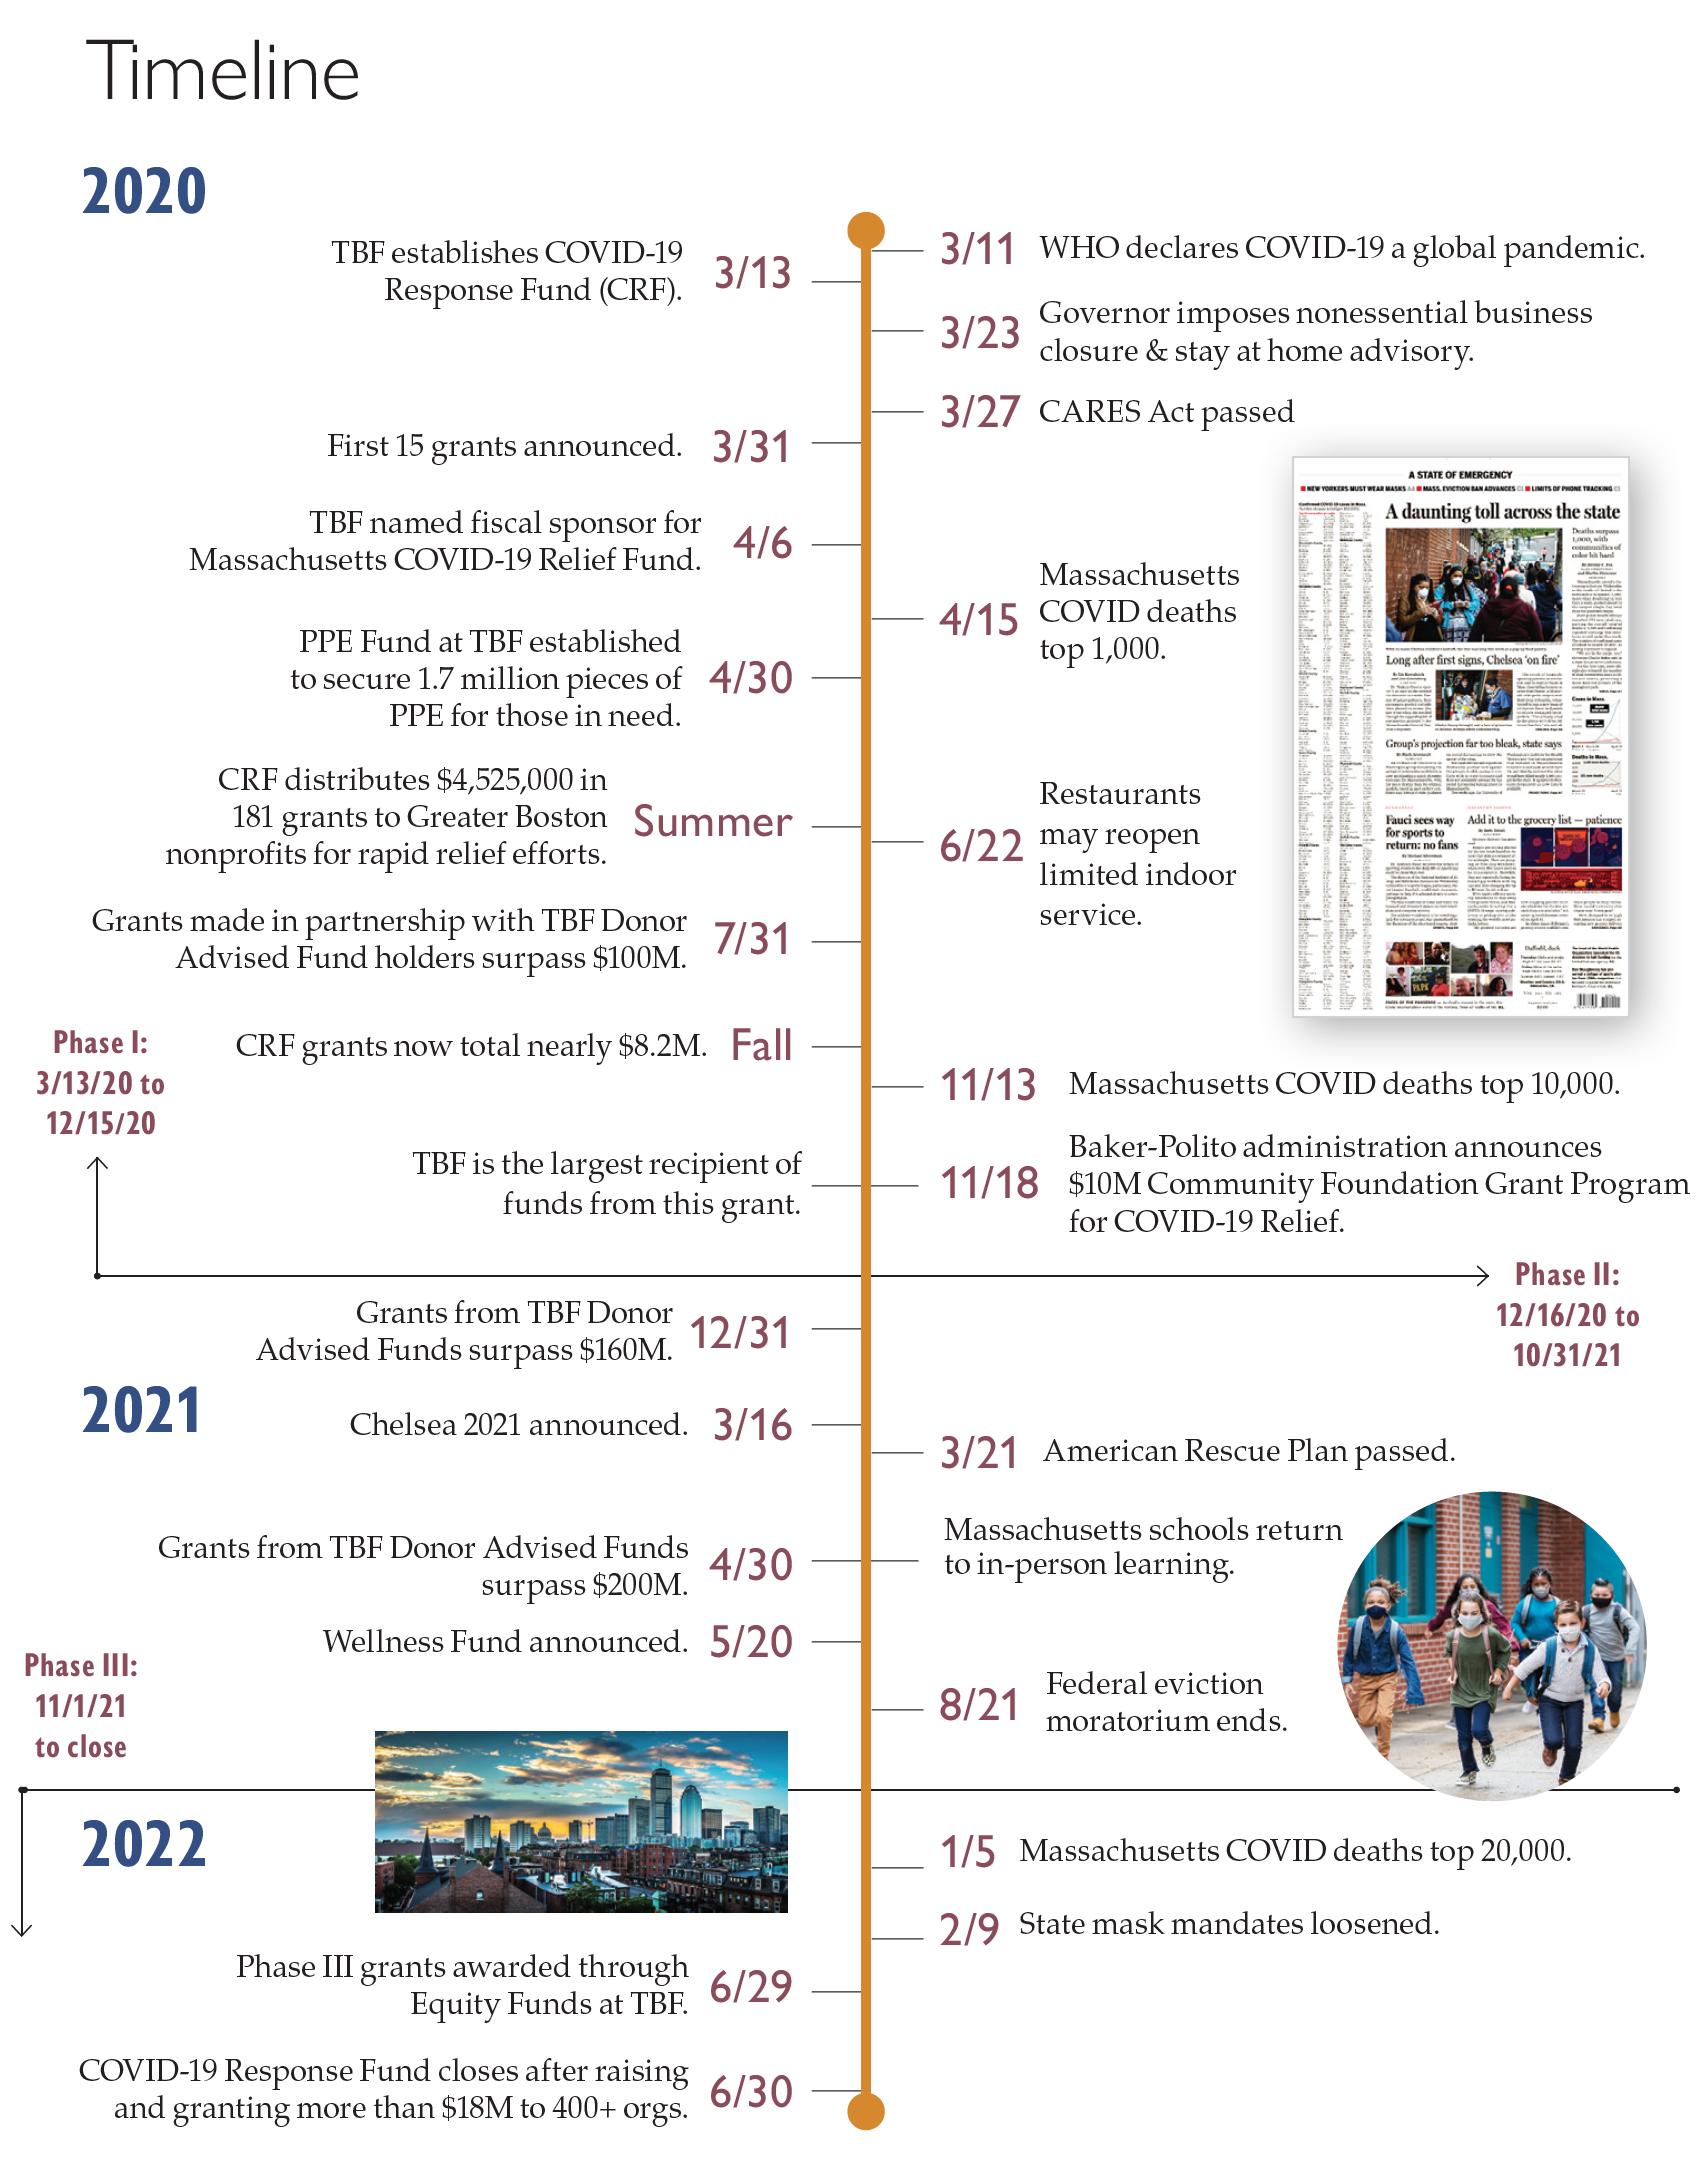 A timeline of the activities of the COVID 19 Response Fund